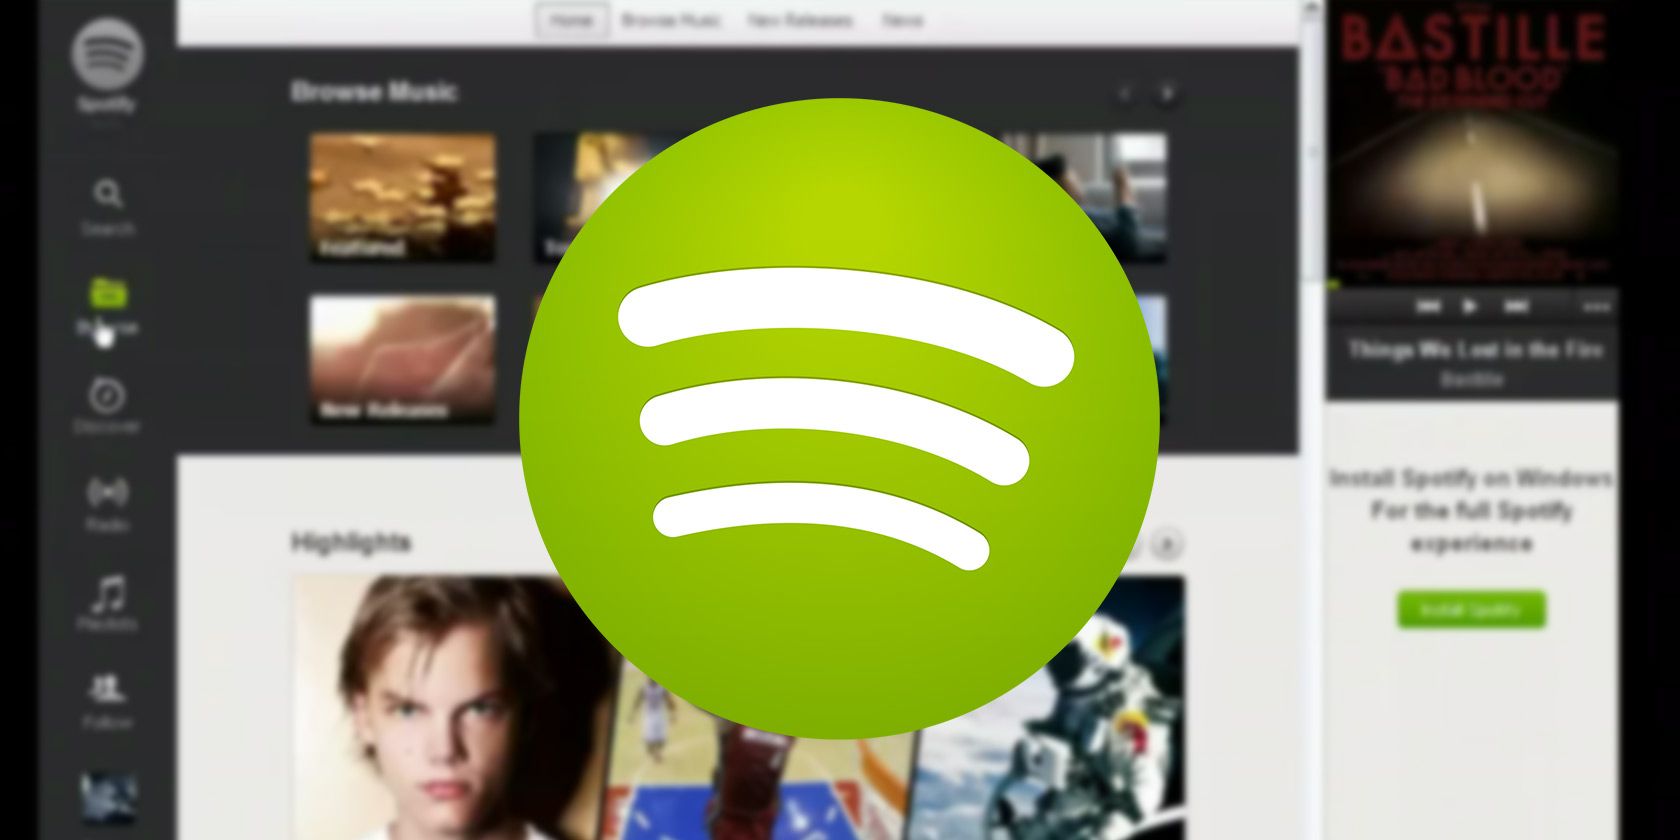 difference between web spotify and downloading on pc